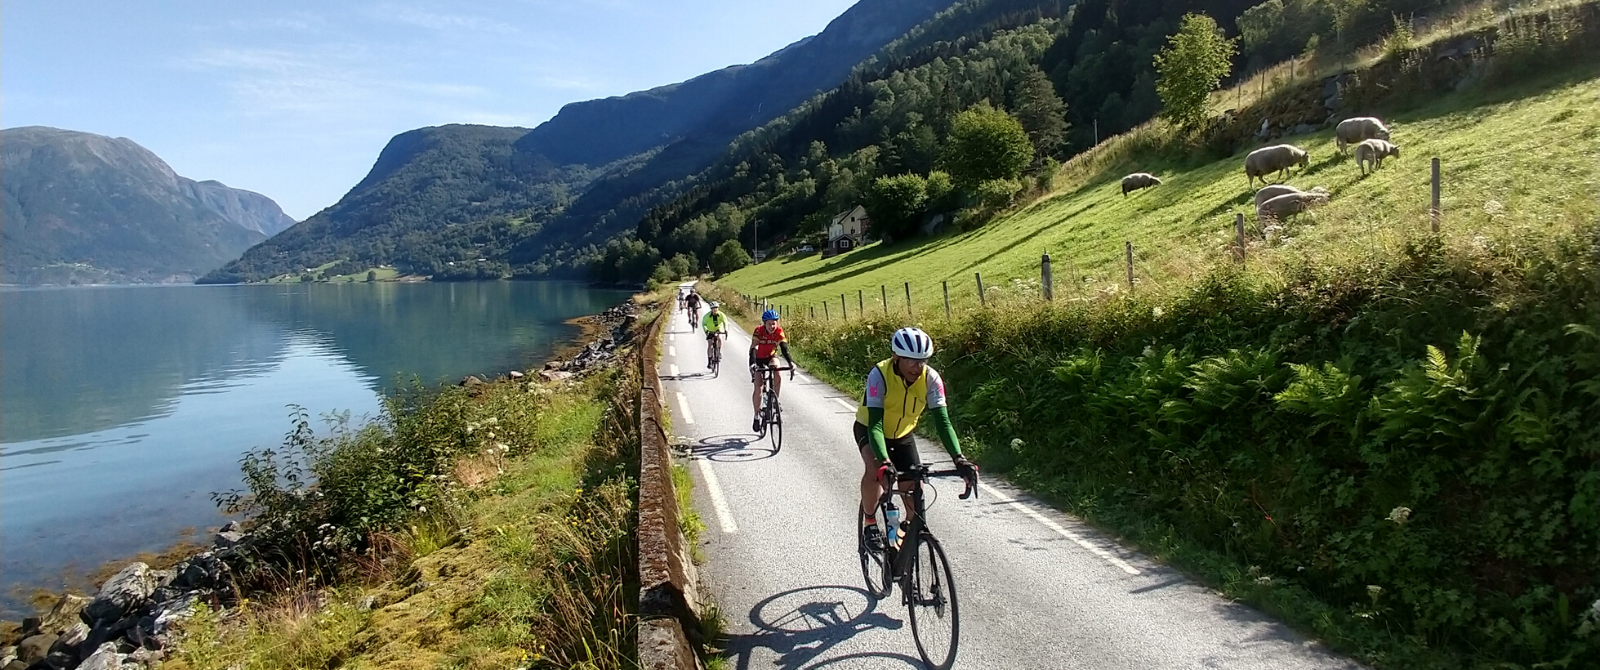 Cyclists riding along a fjord